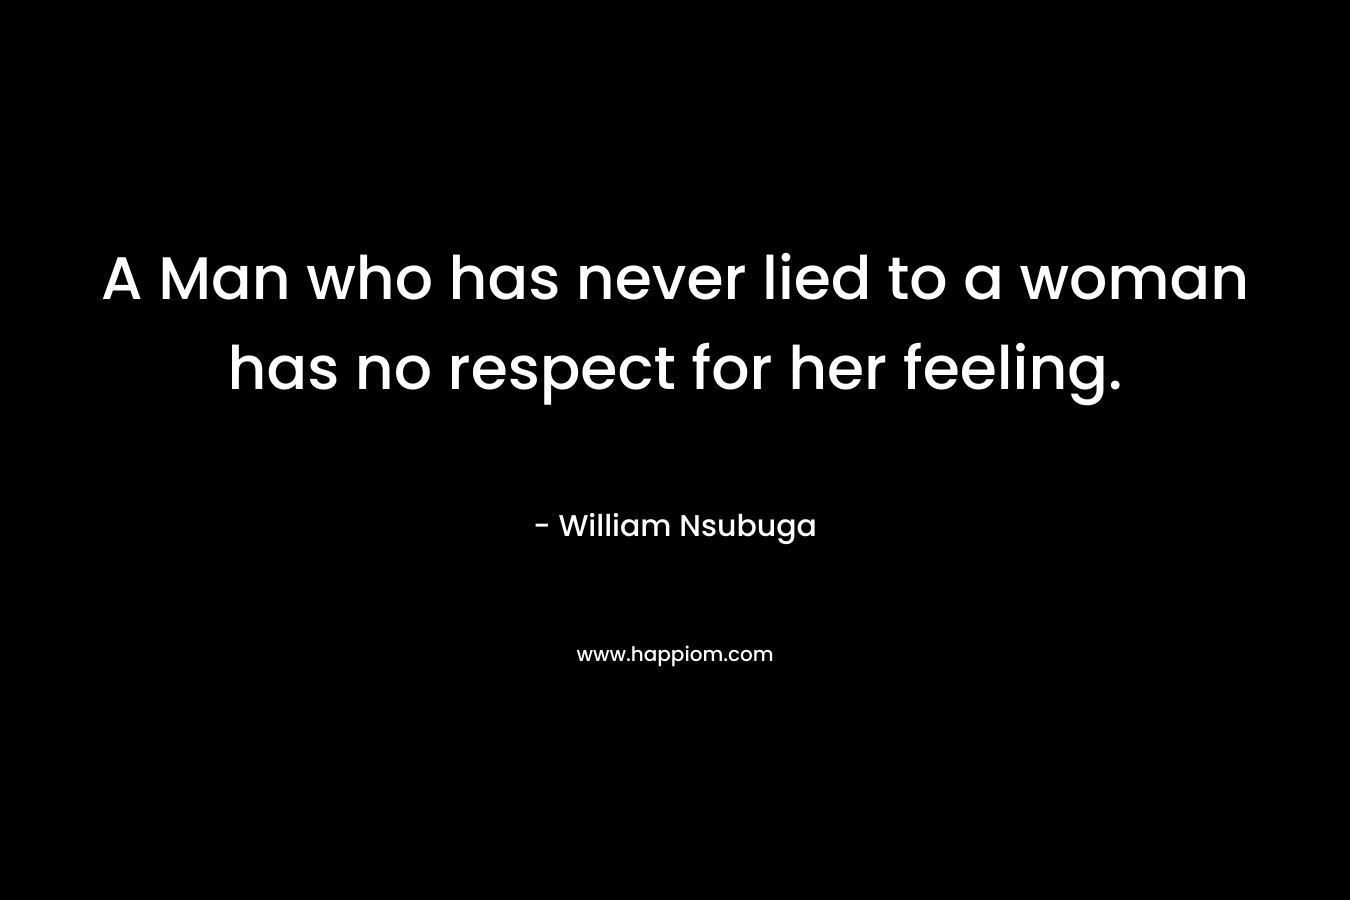 A Man who has never lied to a woman has no respect for her feeling.